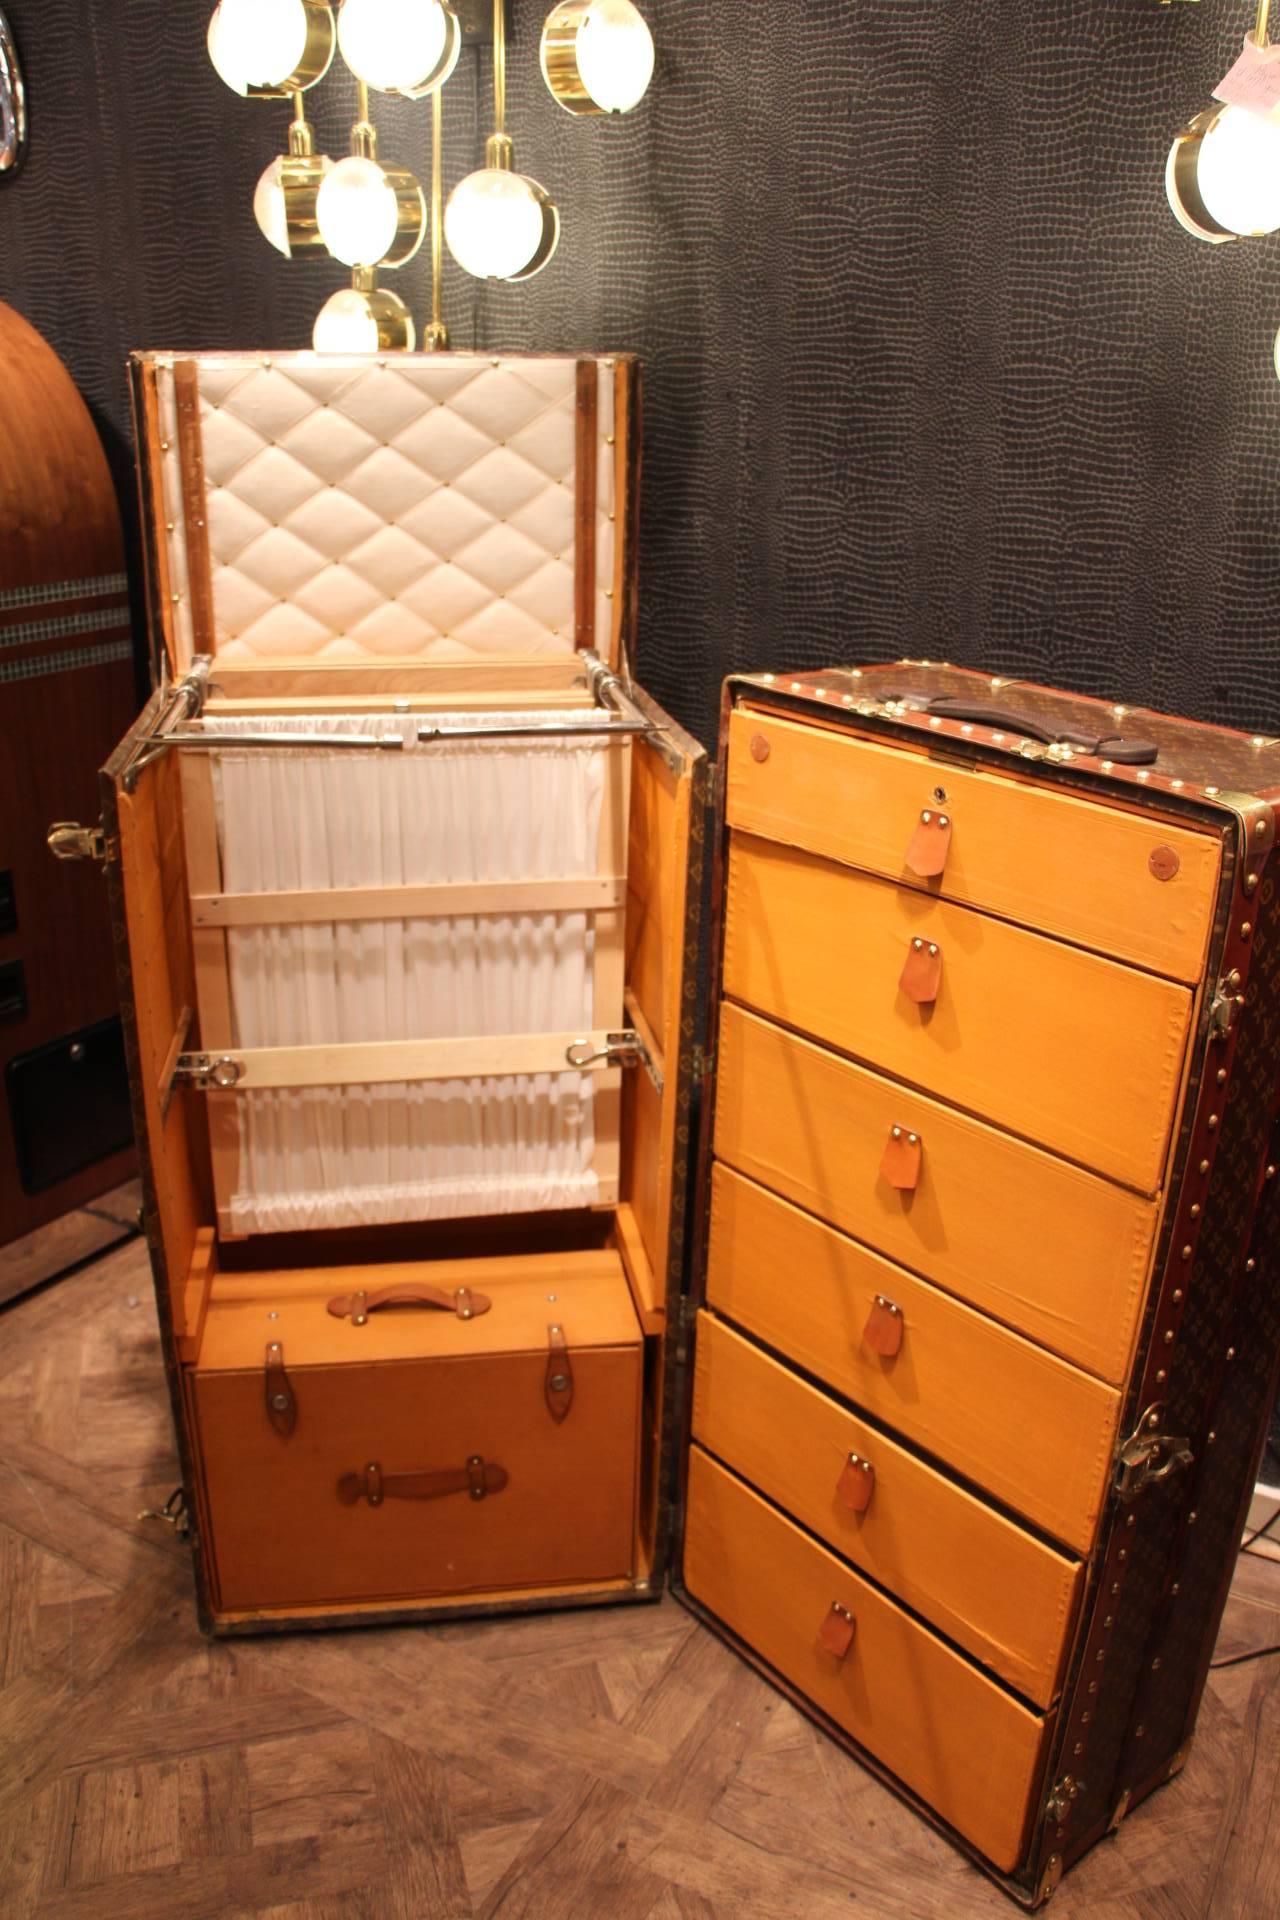 This impressive Louis Vuitton wardrobe features stenciled monogramm canvas, lozine trims, brass LV stamped locks and studs as well as its lift top. It has got a beautiful warm patina.
Its interior is complete with its original hangers, its